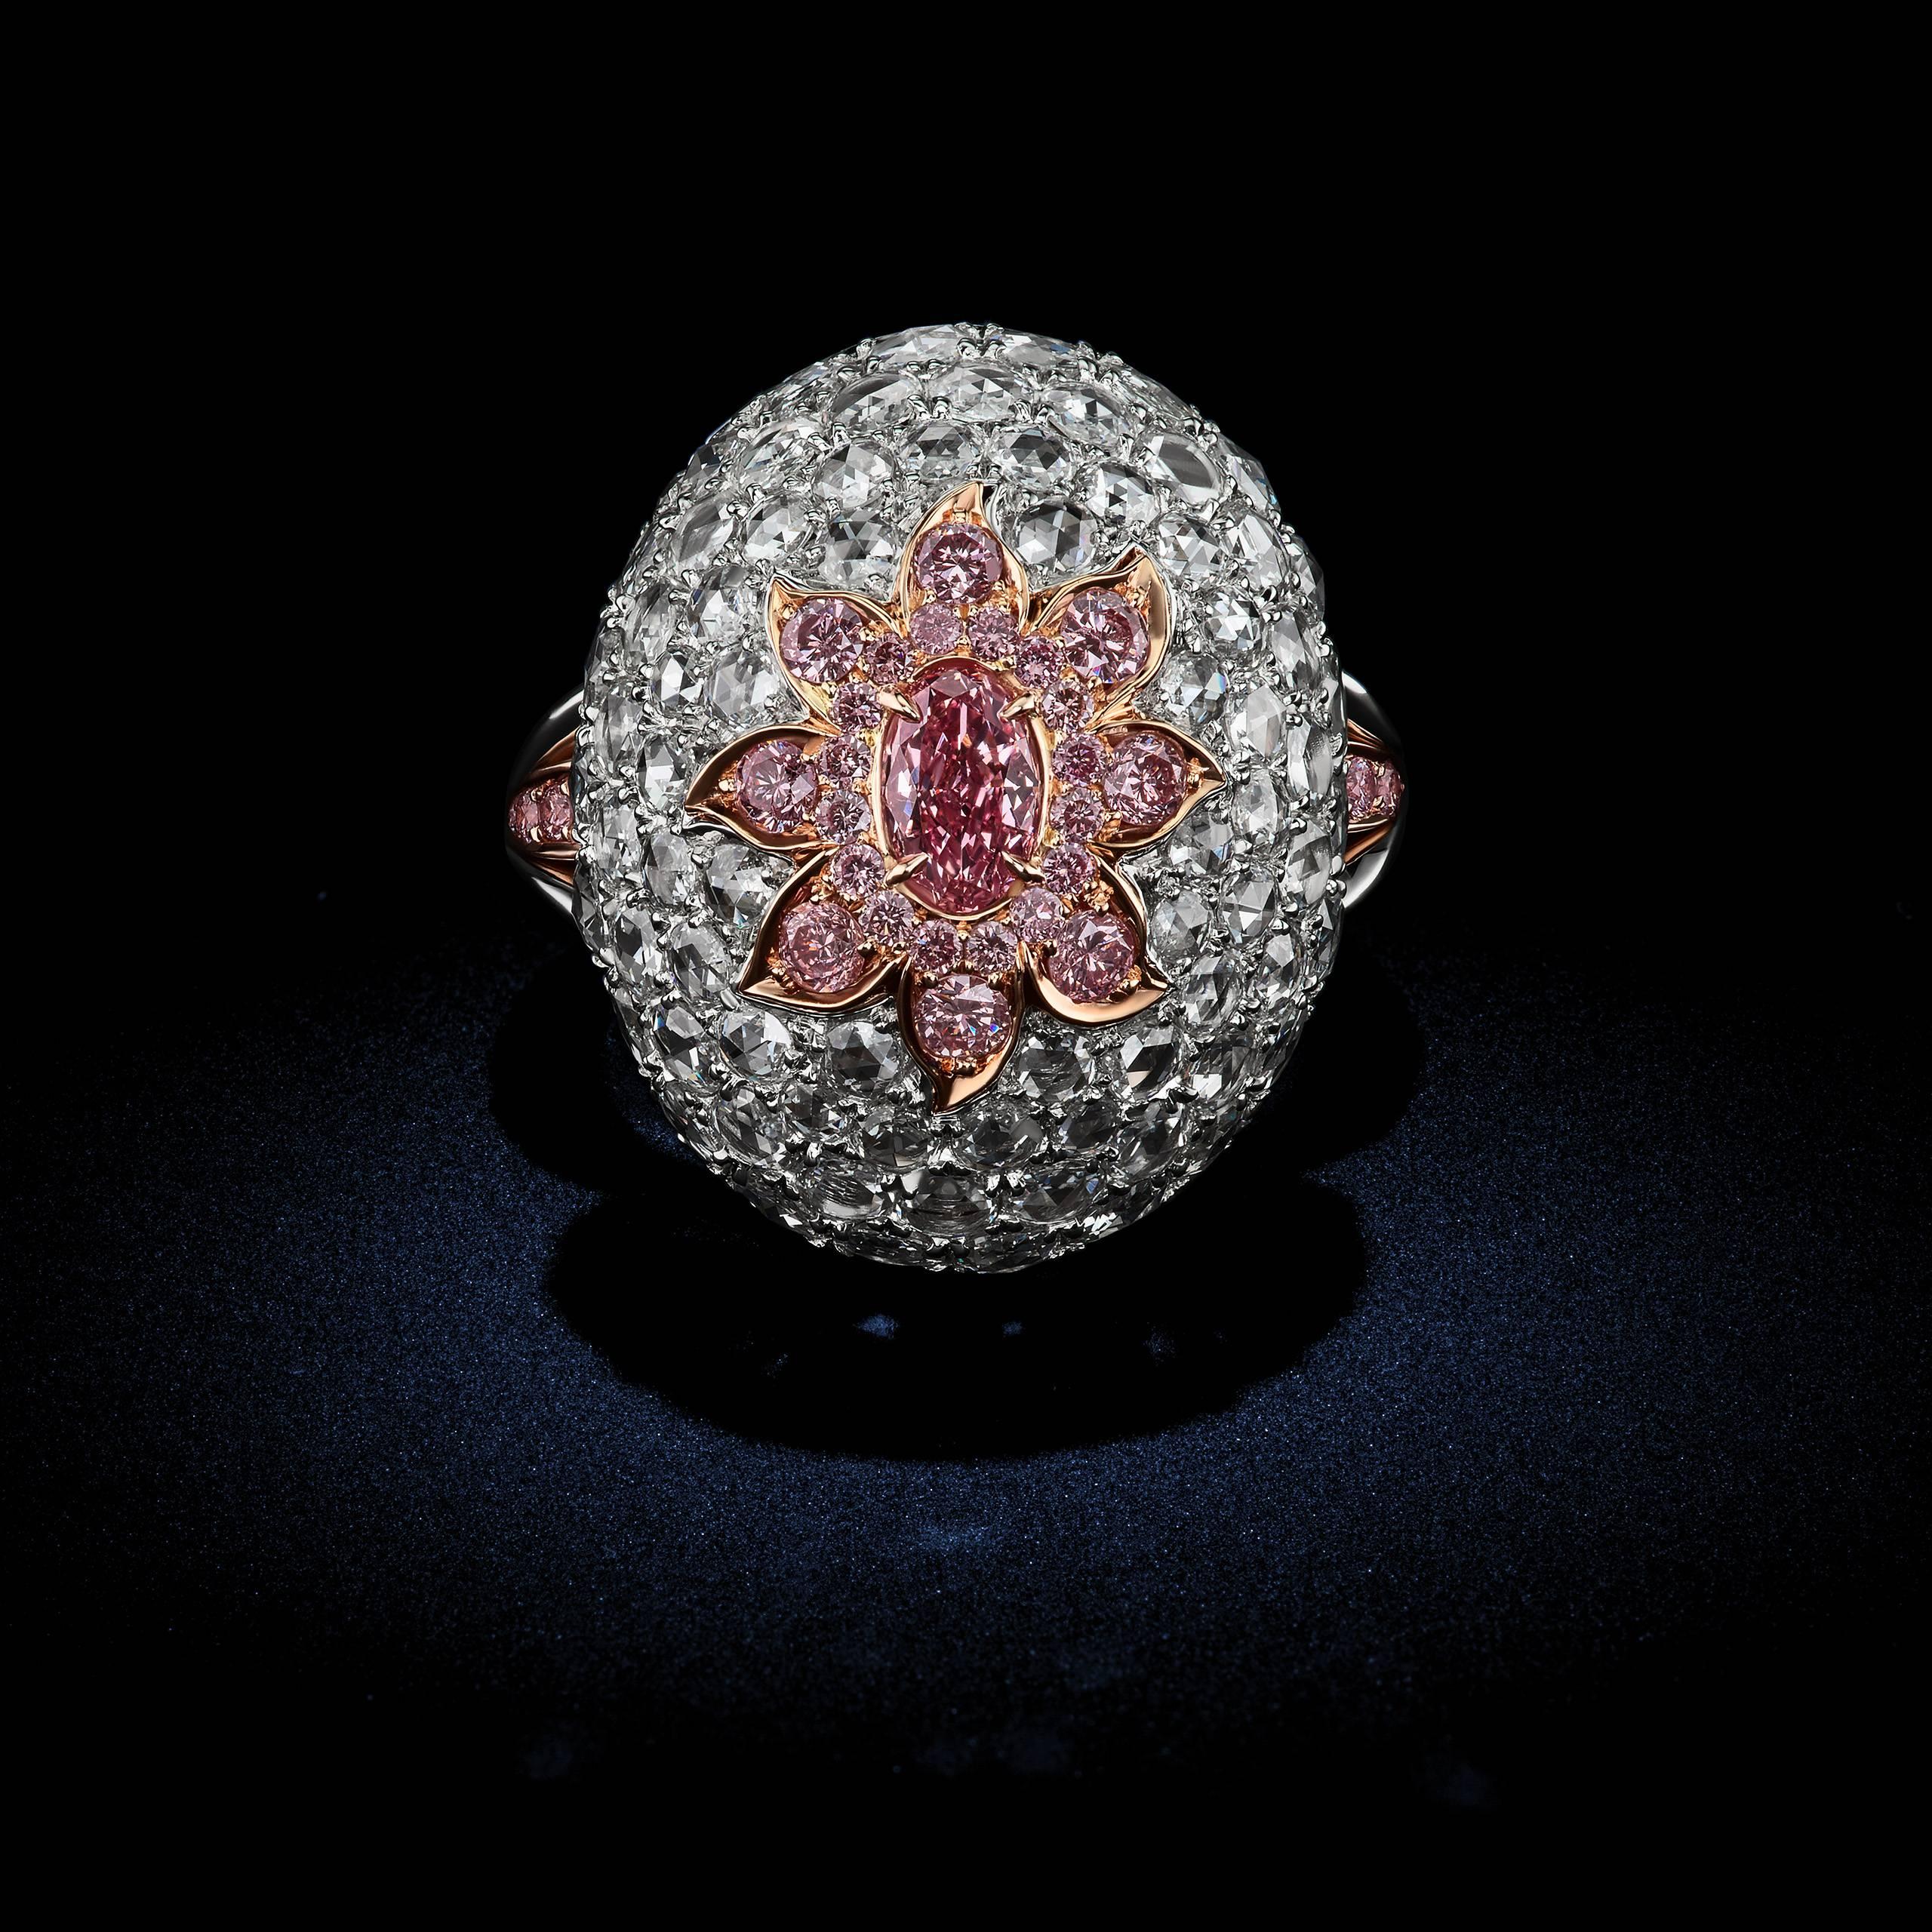 Countless Pavé set white Diamonds support this exotic beauty abloom with scintillating petals of pink Diamonds and a GIA Certified Fancy Intense Argyle Pink Diamond. This romantic center-stone emanates a rich warm pink color with deeper tones of